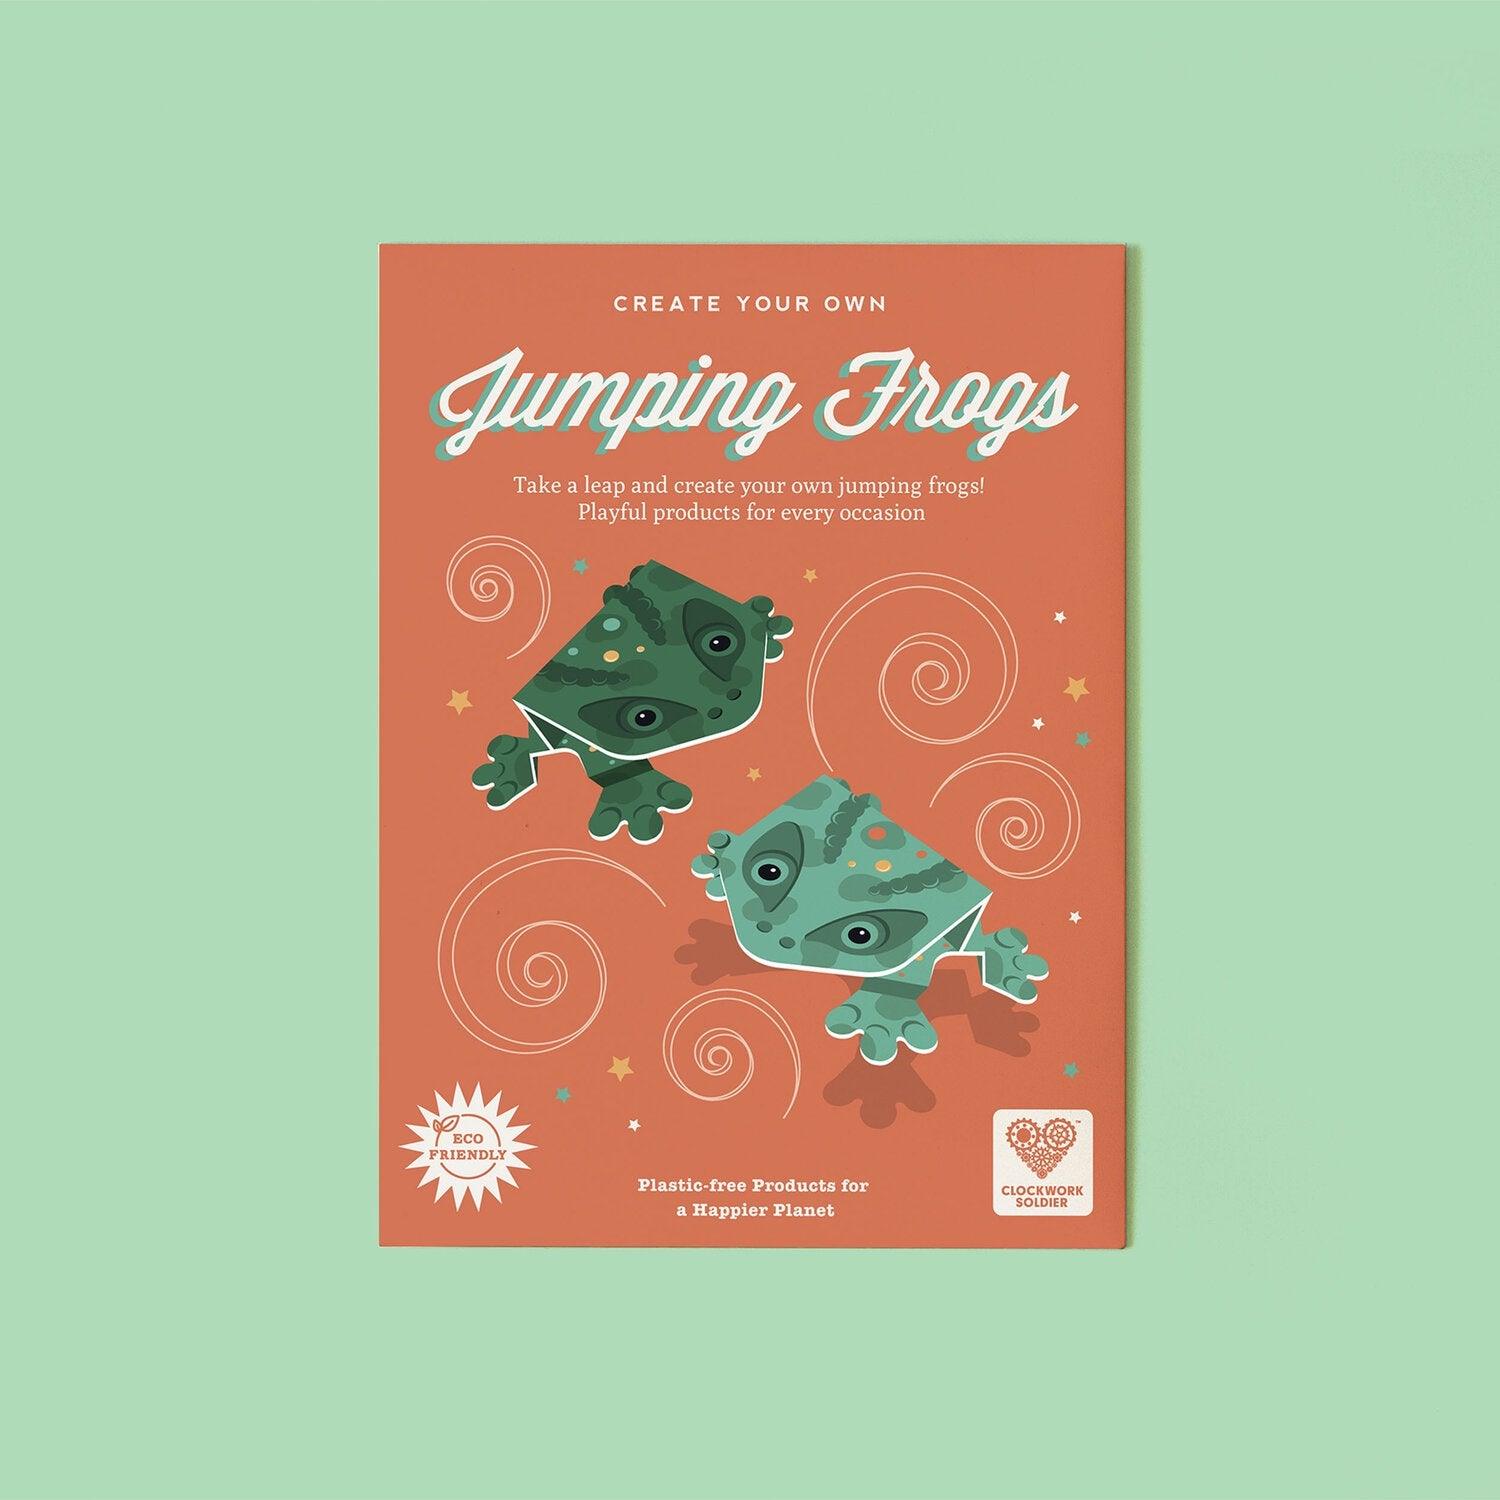 Create Your Own Jumping Frogs - Pretty Shiny Shop